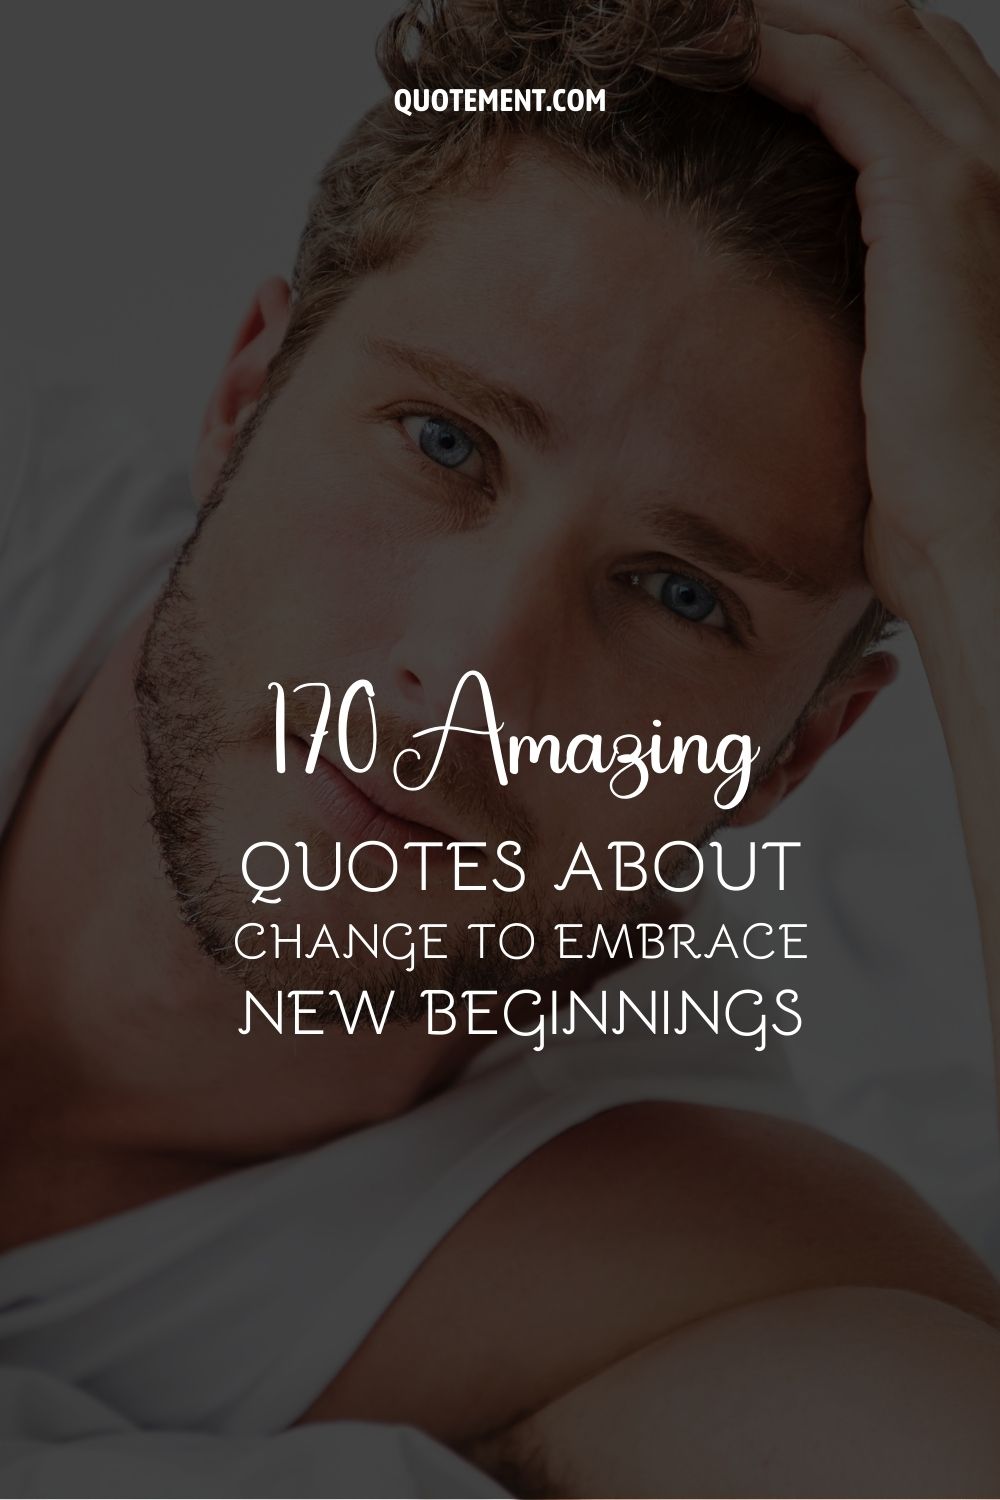 170 Amazing Quotes About Change To Embrace New Beginnings
